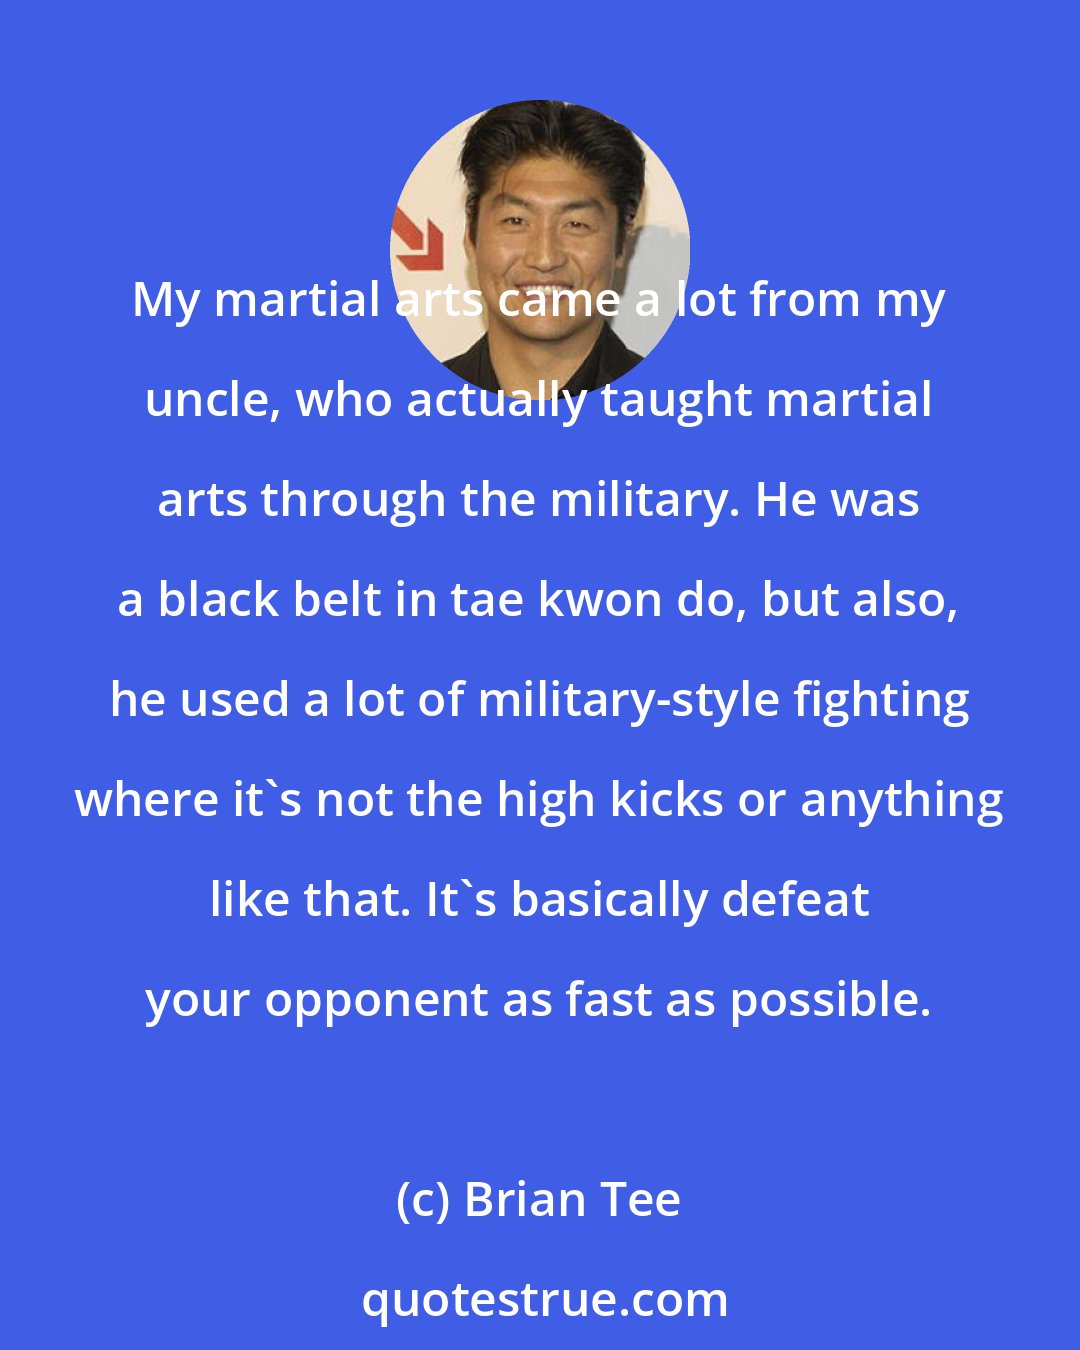 Brian Tee: My martial arts came a lot from my uncle, who actually taught martial arts through the military. He was a black belt in tae kwon do, but also, he used a lot of military-style fighting where it's not the high kicks or anything like that. It's basically defeat your opponent as fast as possible.